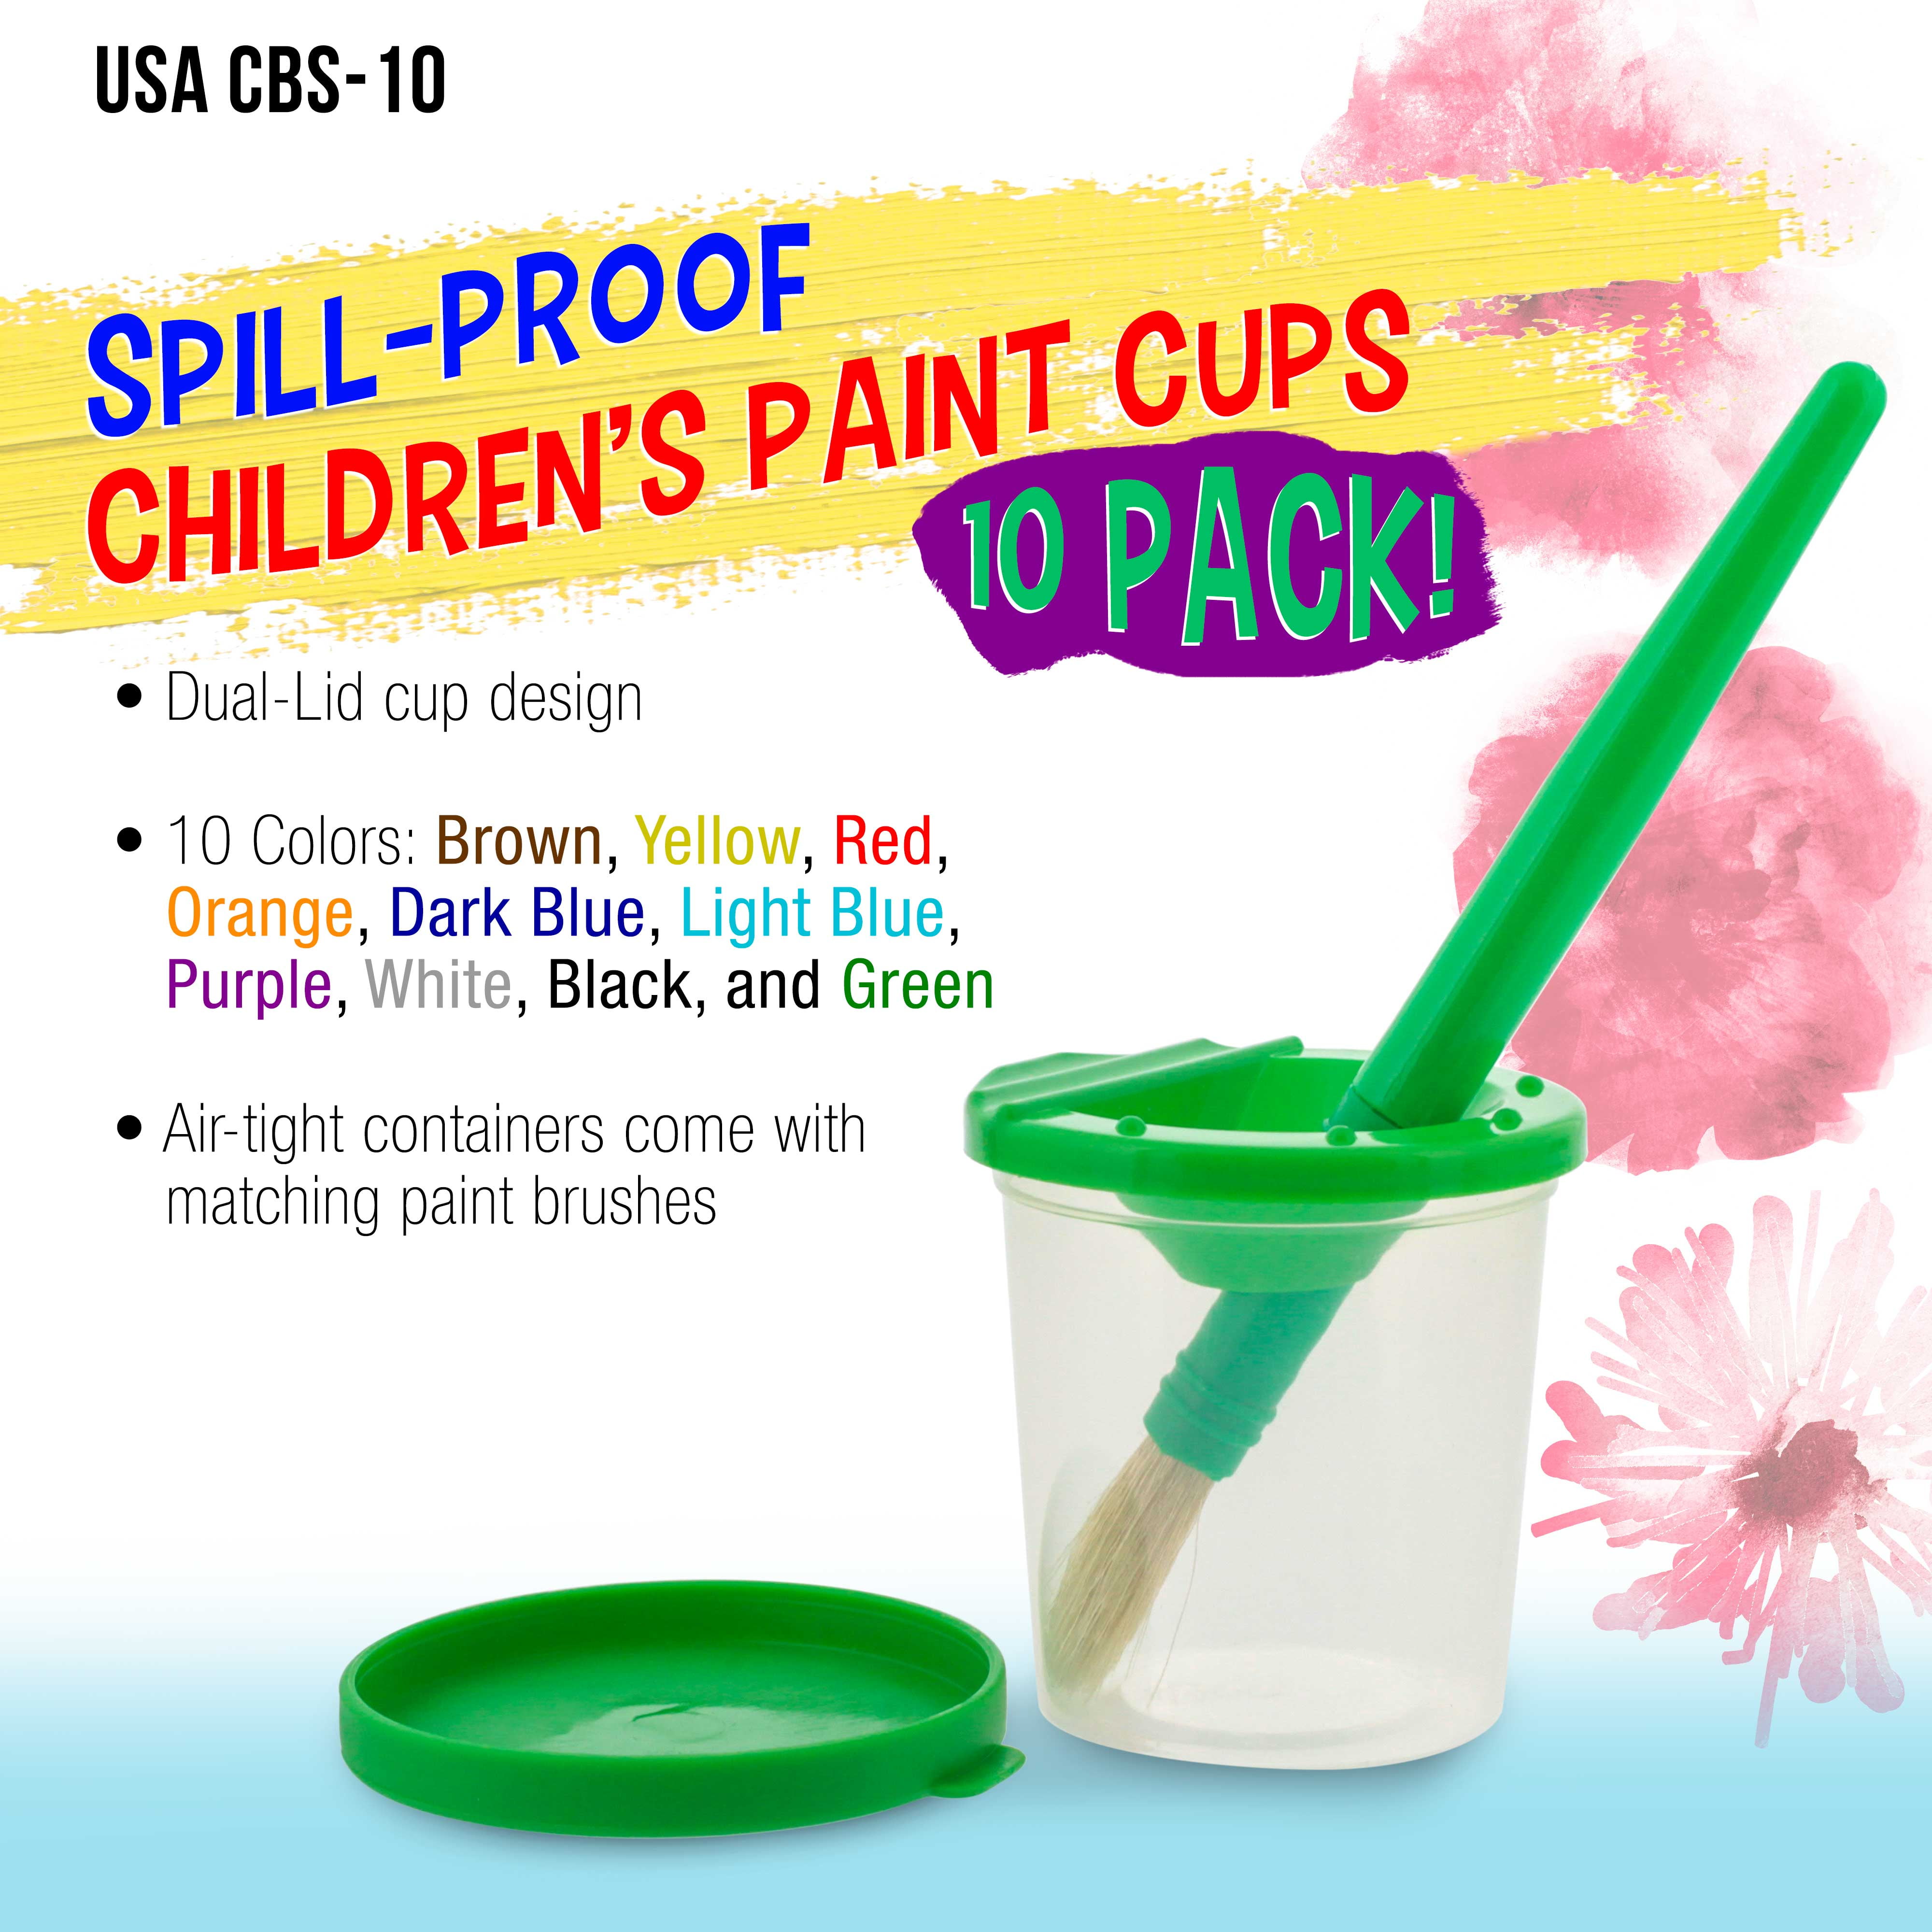 Children’s Art and Crafts Kit 5 Paint Pots and 10 Kids Paint Brushes edukit Spill Proof Paint Cups and Children’s Paint Brush Set